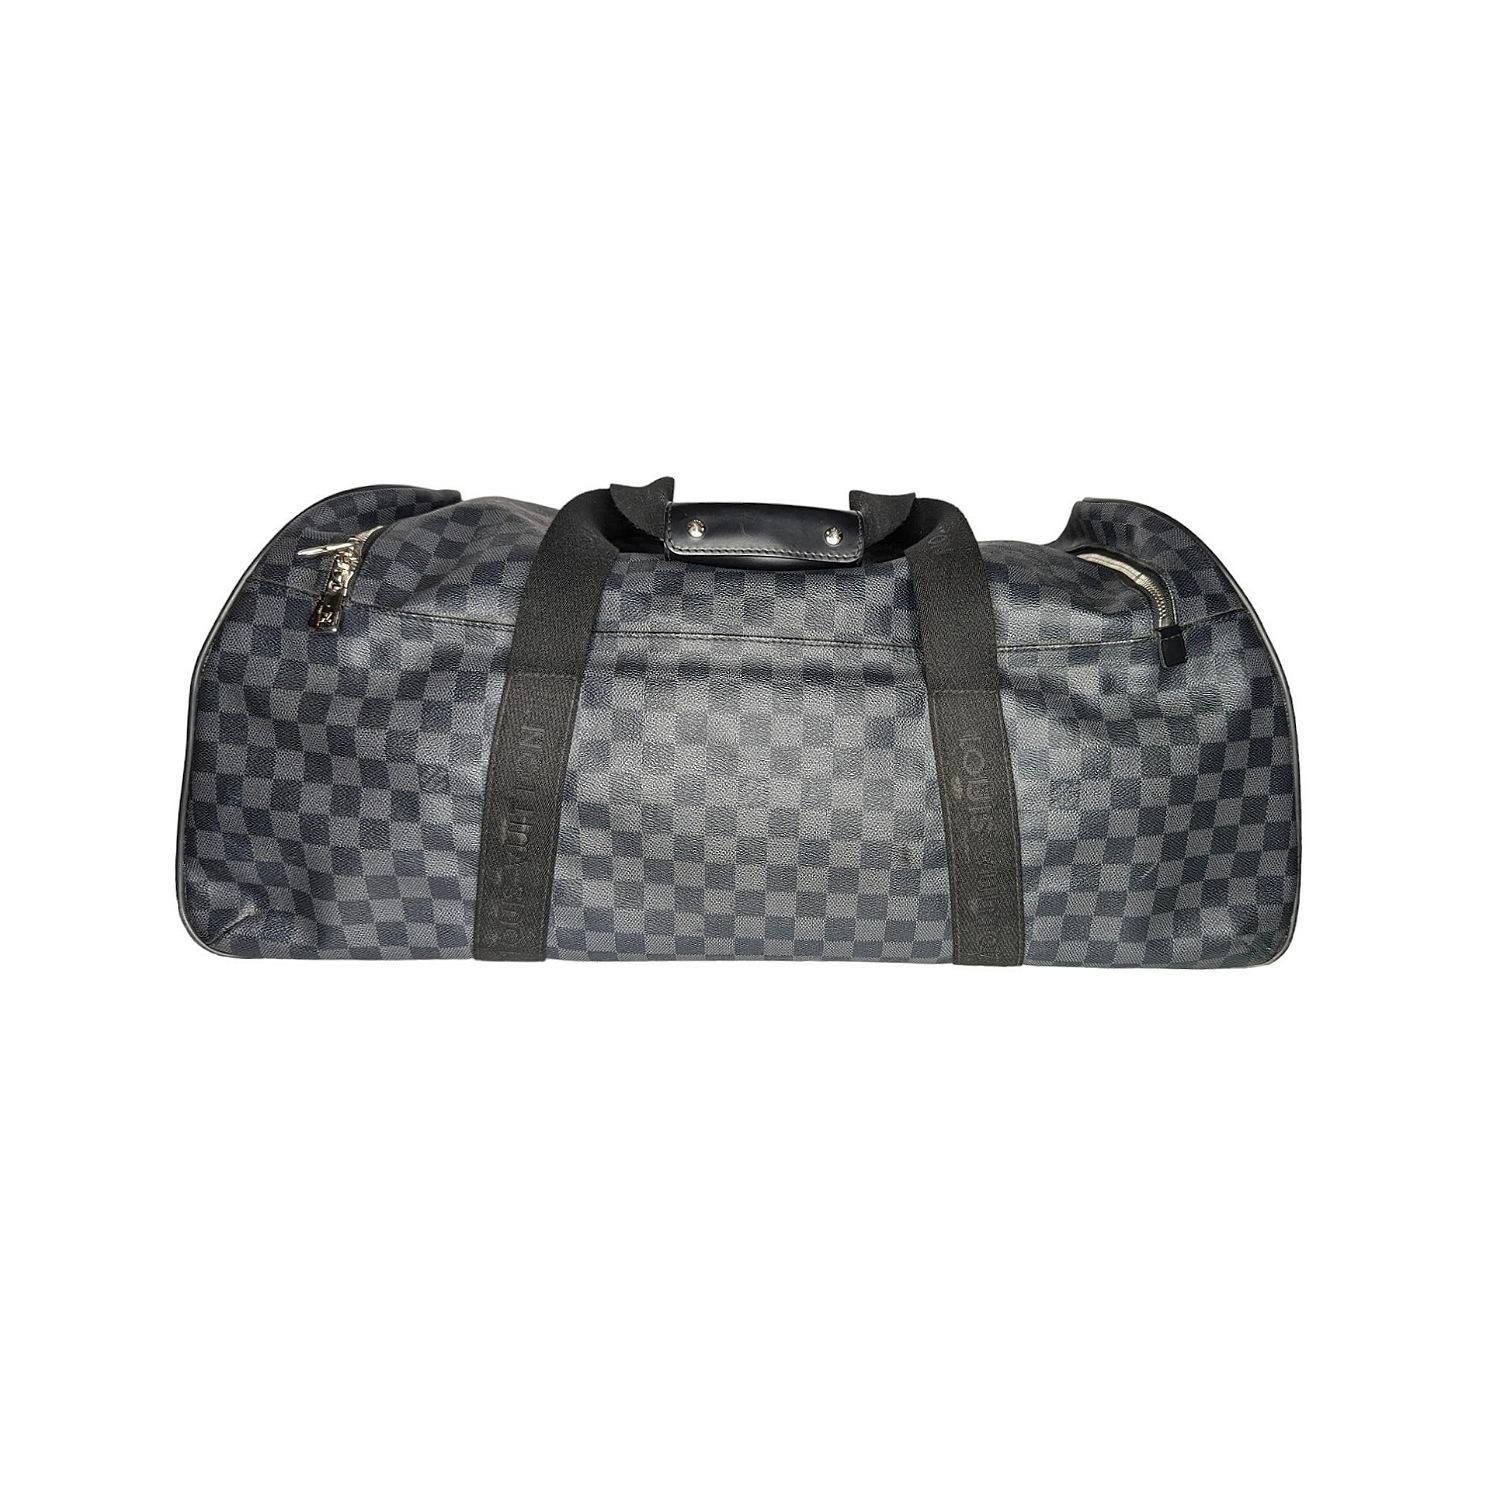 The Louis Vuitton Damier Graphite Canvas Neo Eole 65 Rolling Duffle Bag is named after the Greek god and is the ideal weekend bag. Features spacious interior, anti-skid wheels on one side, dual canvas top handles and a hidden retractable